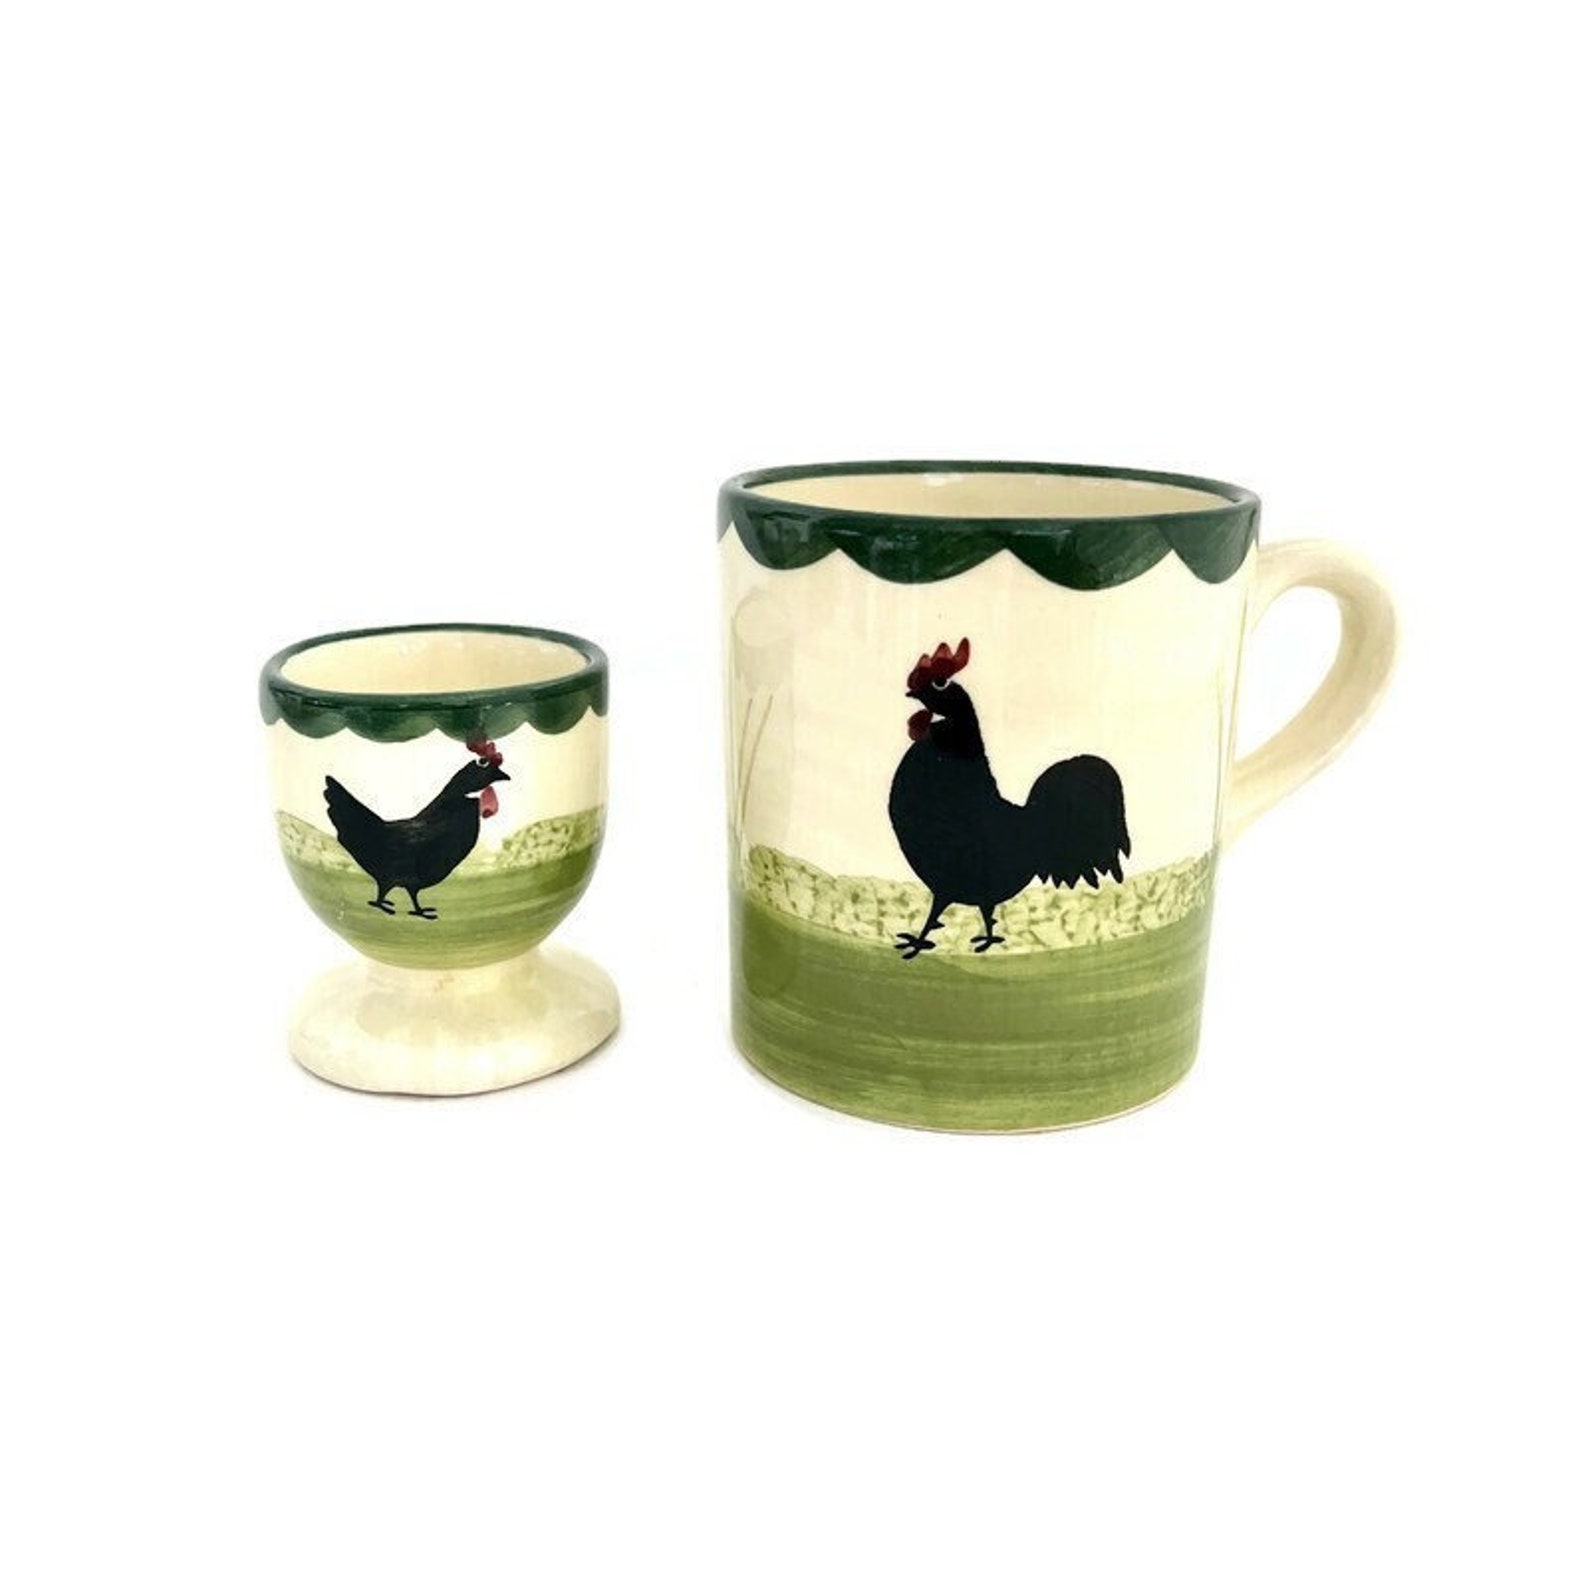 Egg Cup and Mug 1960s | Rooster Breakfast Set | Made in Germany | Zell am Harmersbach Pottery